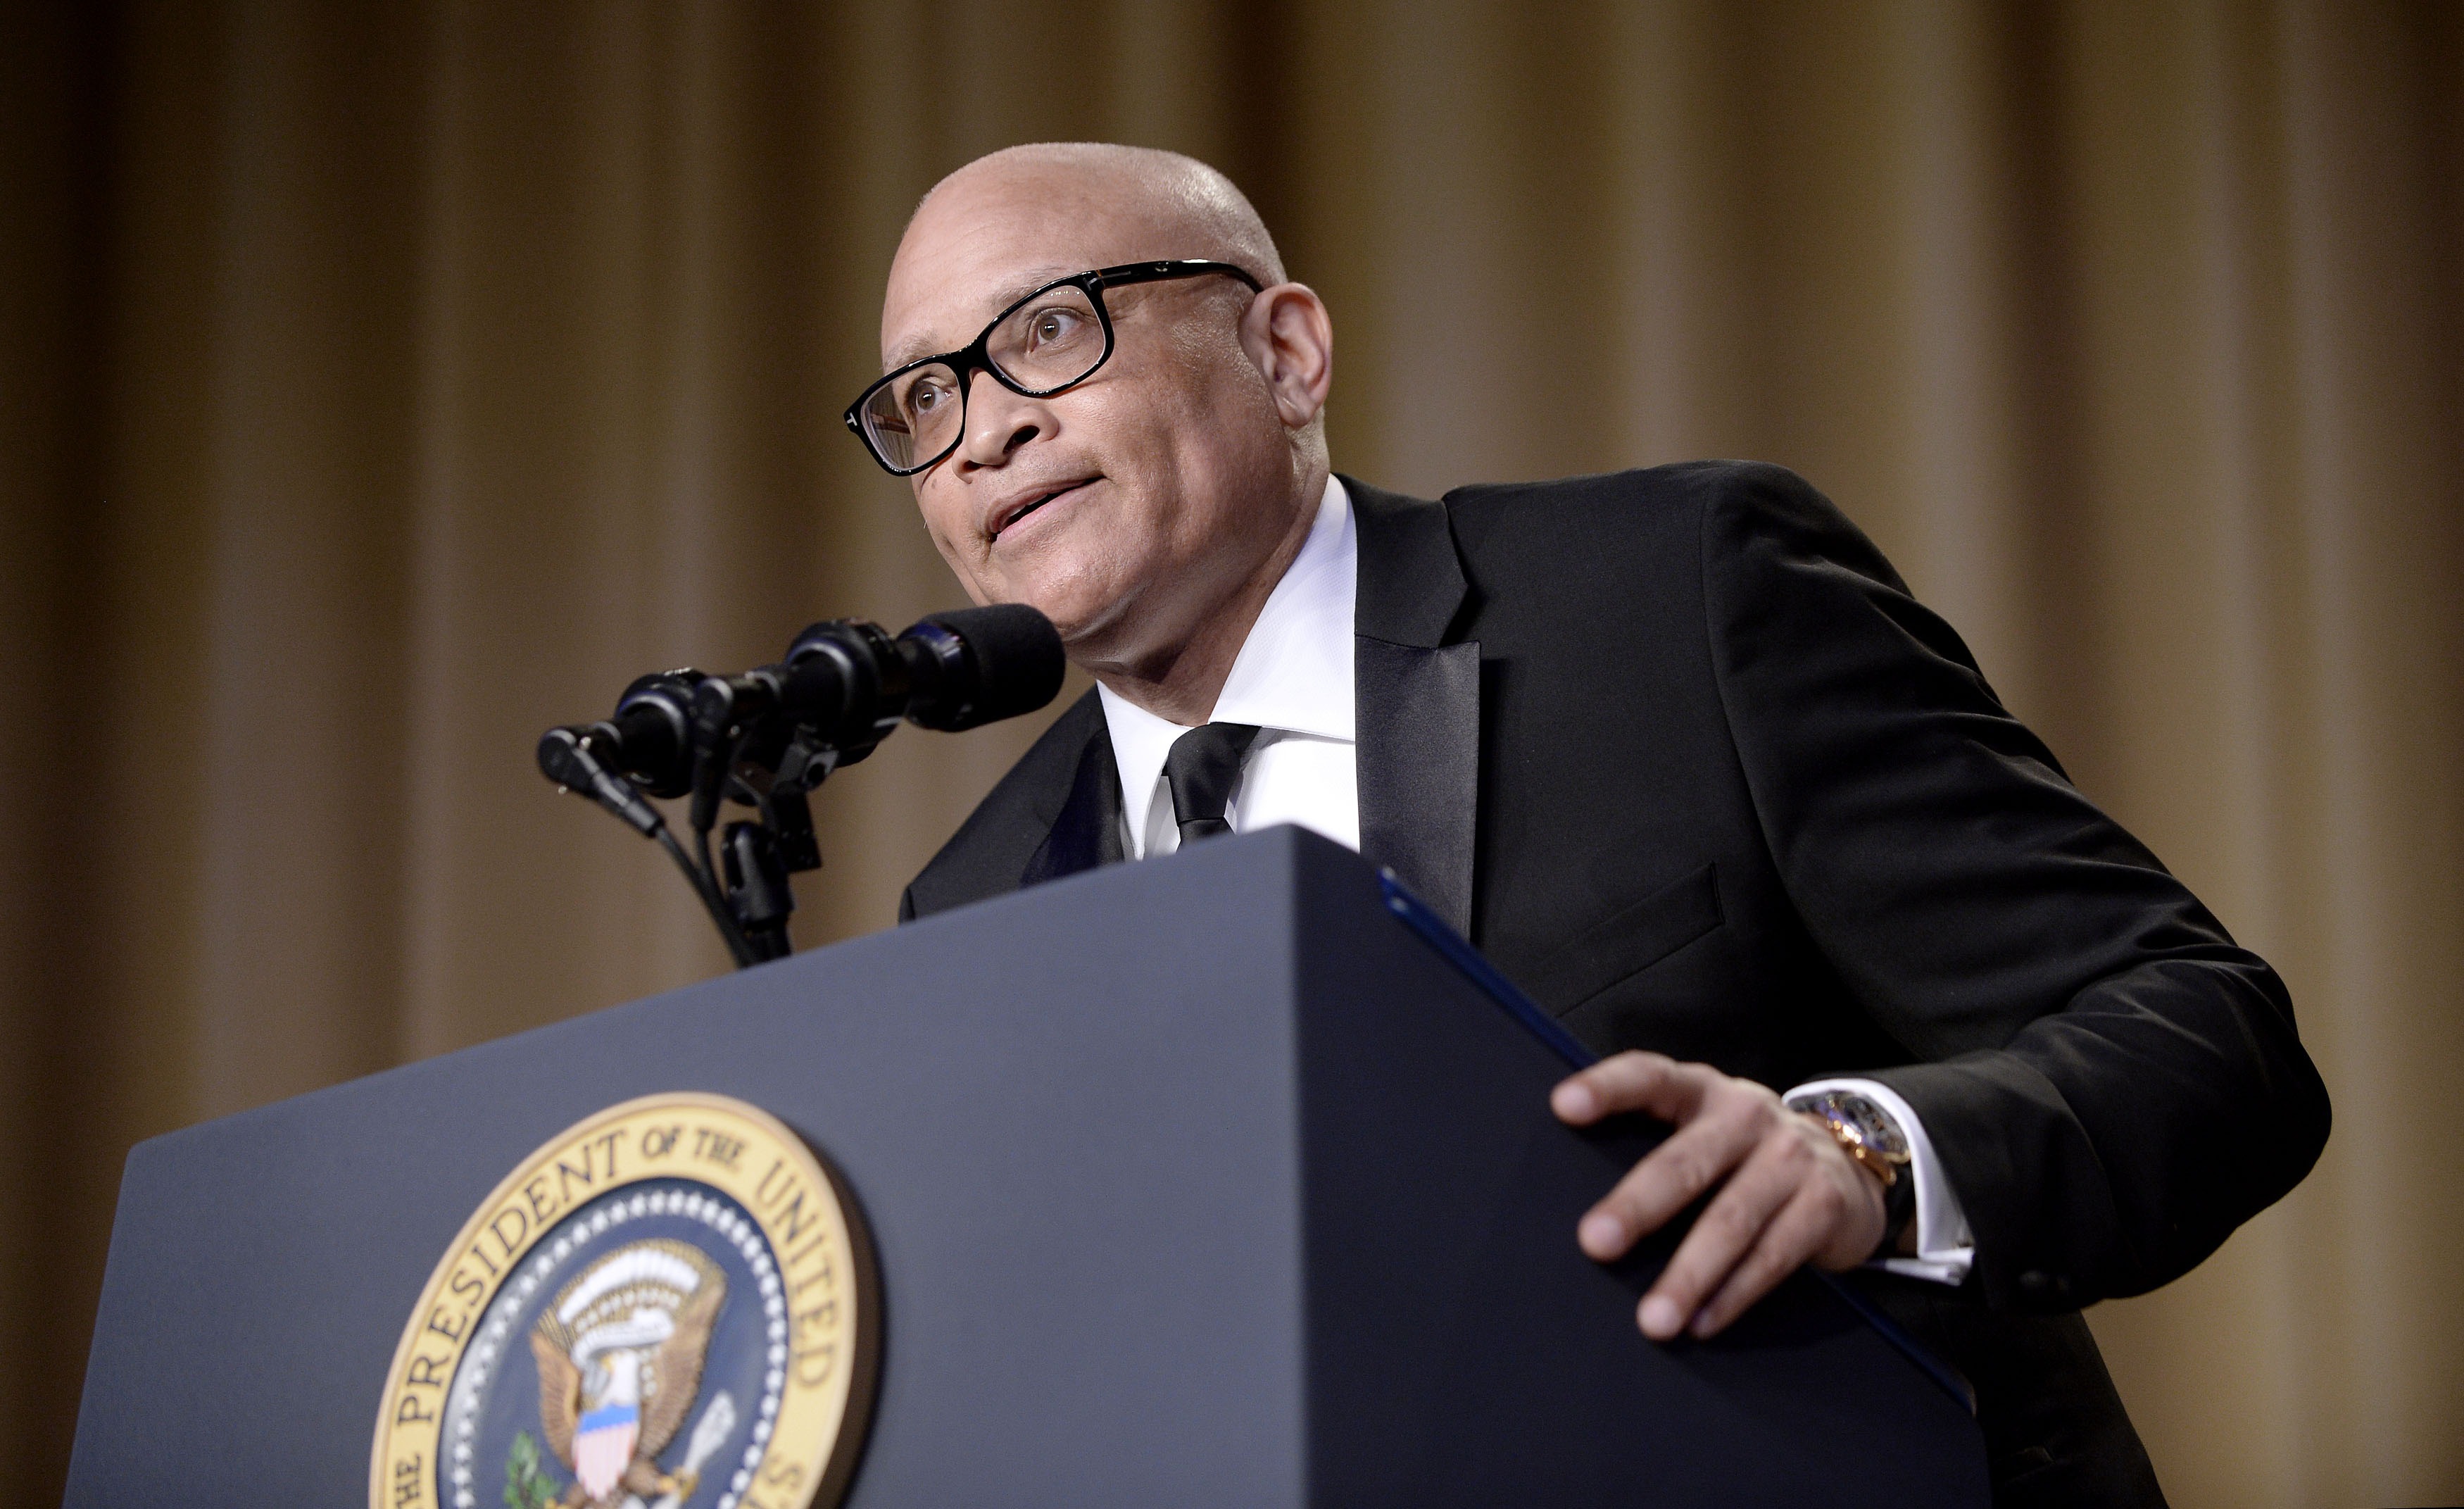 Comedian Larry Wilmore speaks during the White House Correspondents' Association annual dinner at the Washington Hilton hotel in Washington, D.C., on April 30, 2016.